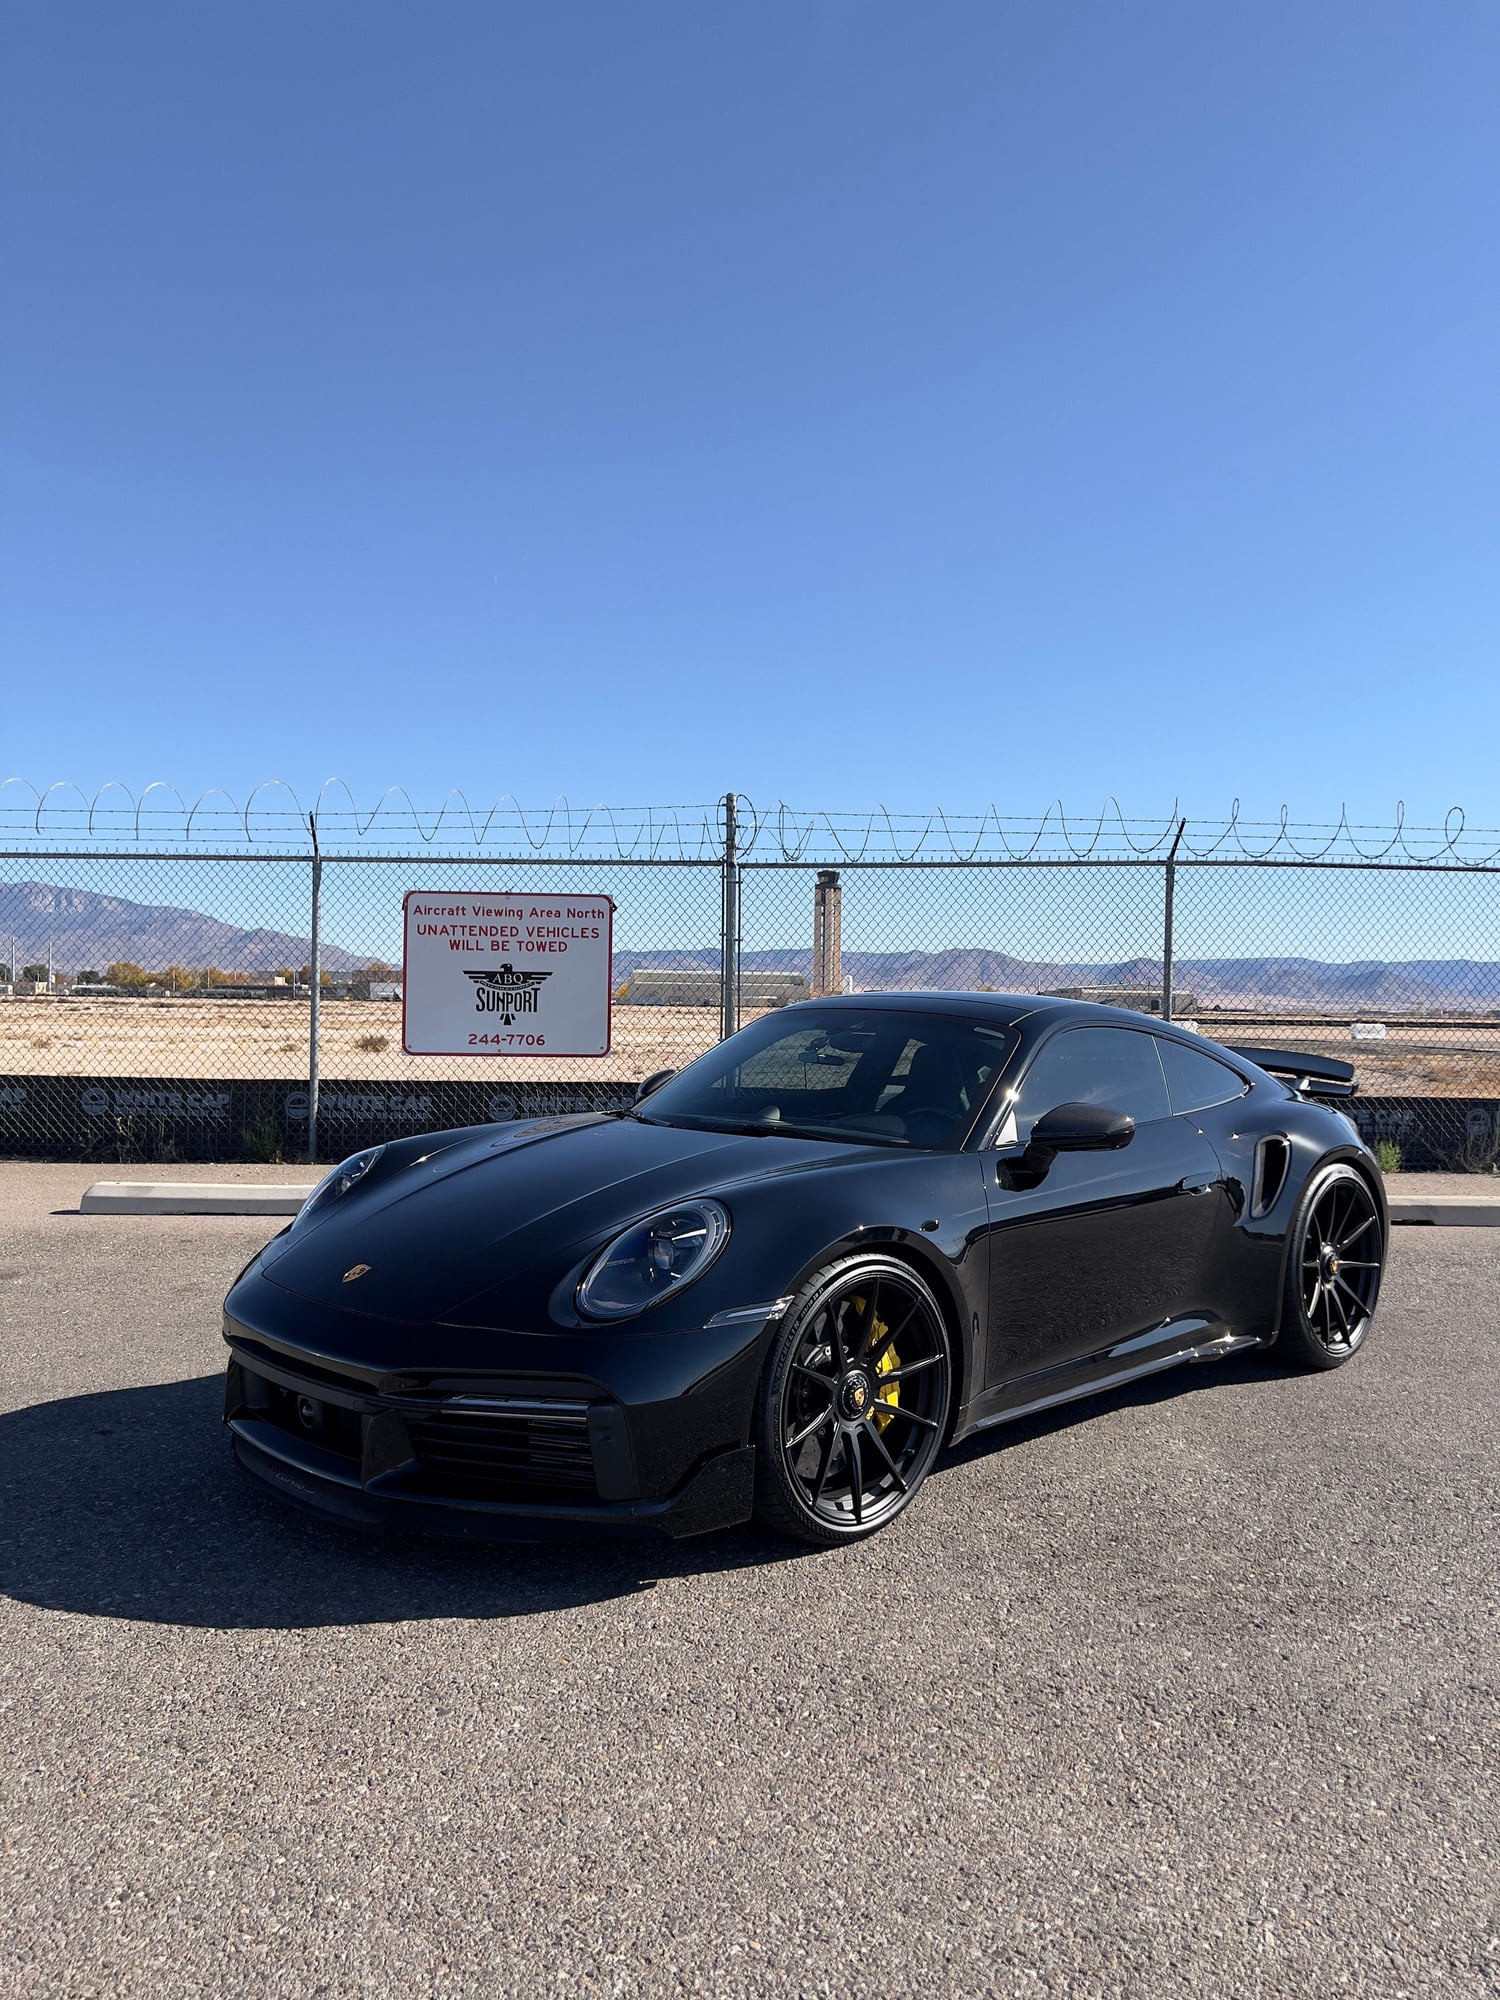 2021 Porsche 911 - Turbo s - 992, loaded - Used - VIN WP0AD2A90MS258188 - 4,750 Miles - 6 cyl - AWD - Automatic - Coupe - Black - Albuquerque, NM 87111, United States